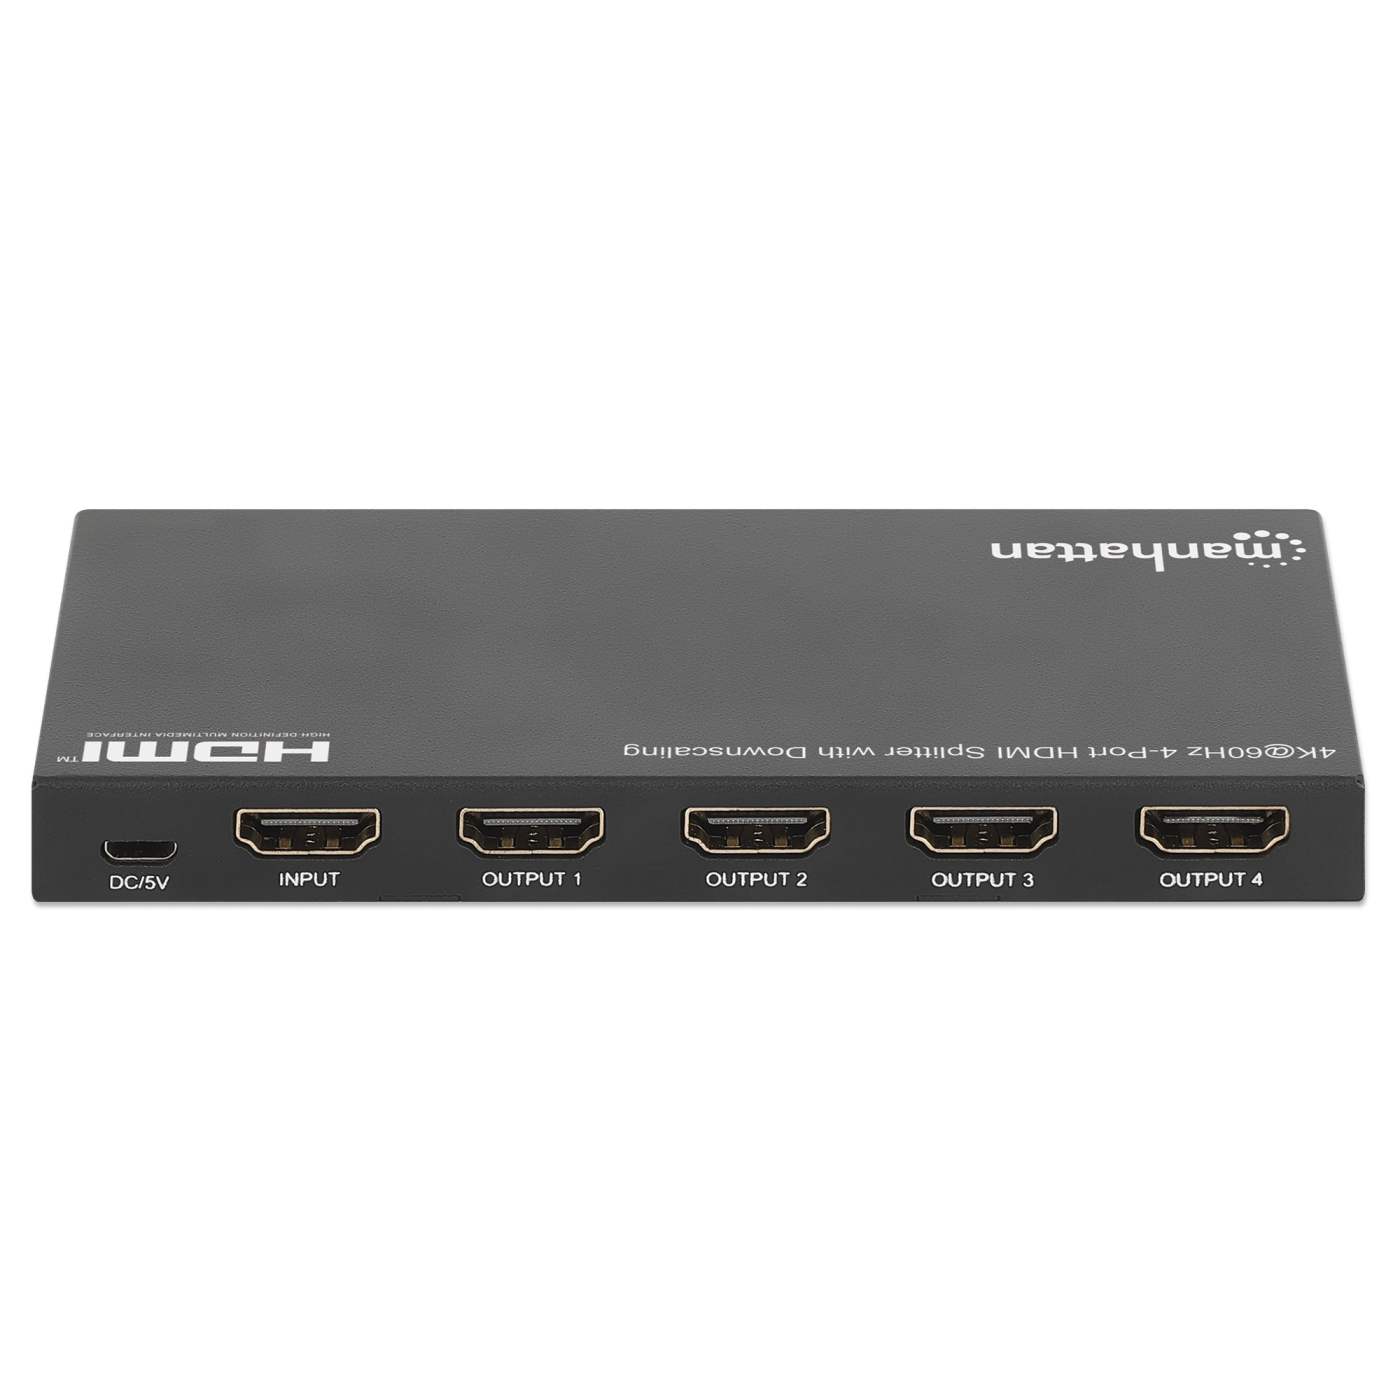 4K@60Hz 4-Port HDMI Splitter with Downscaling Image 6